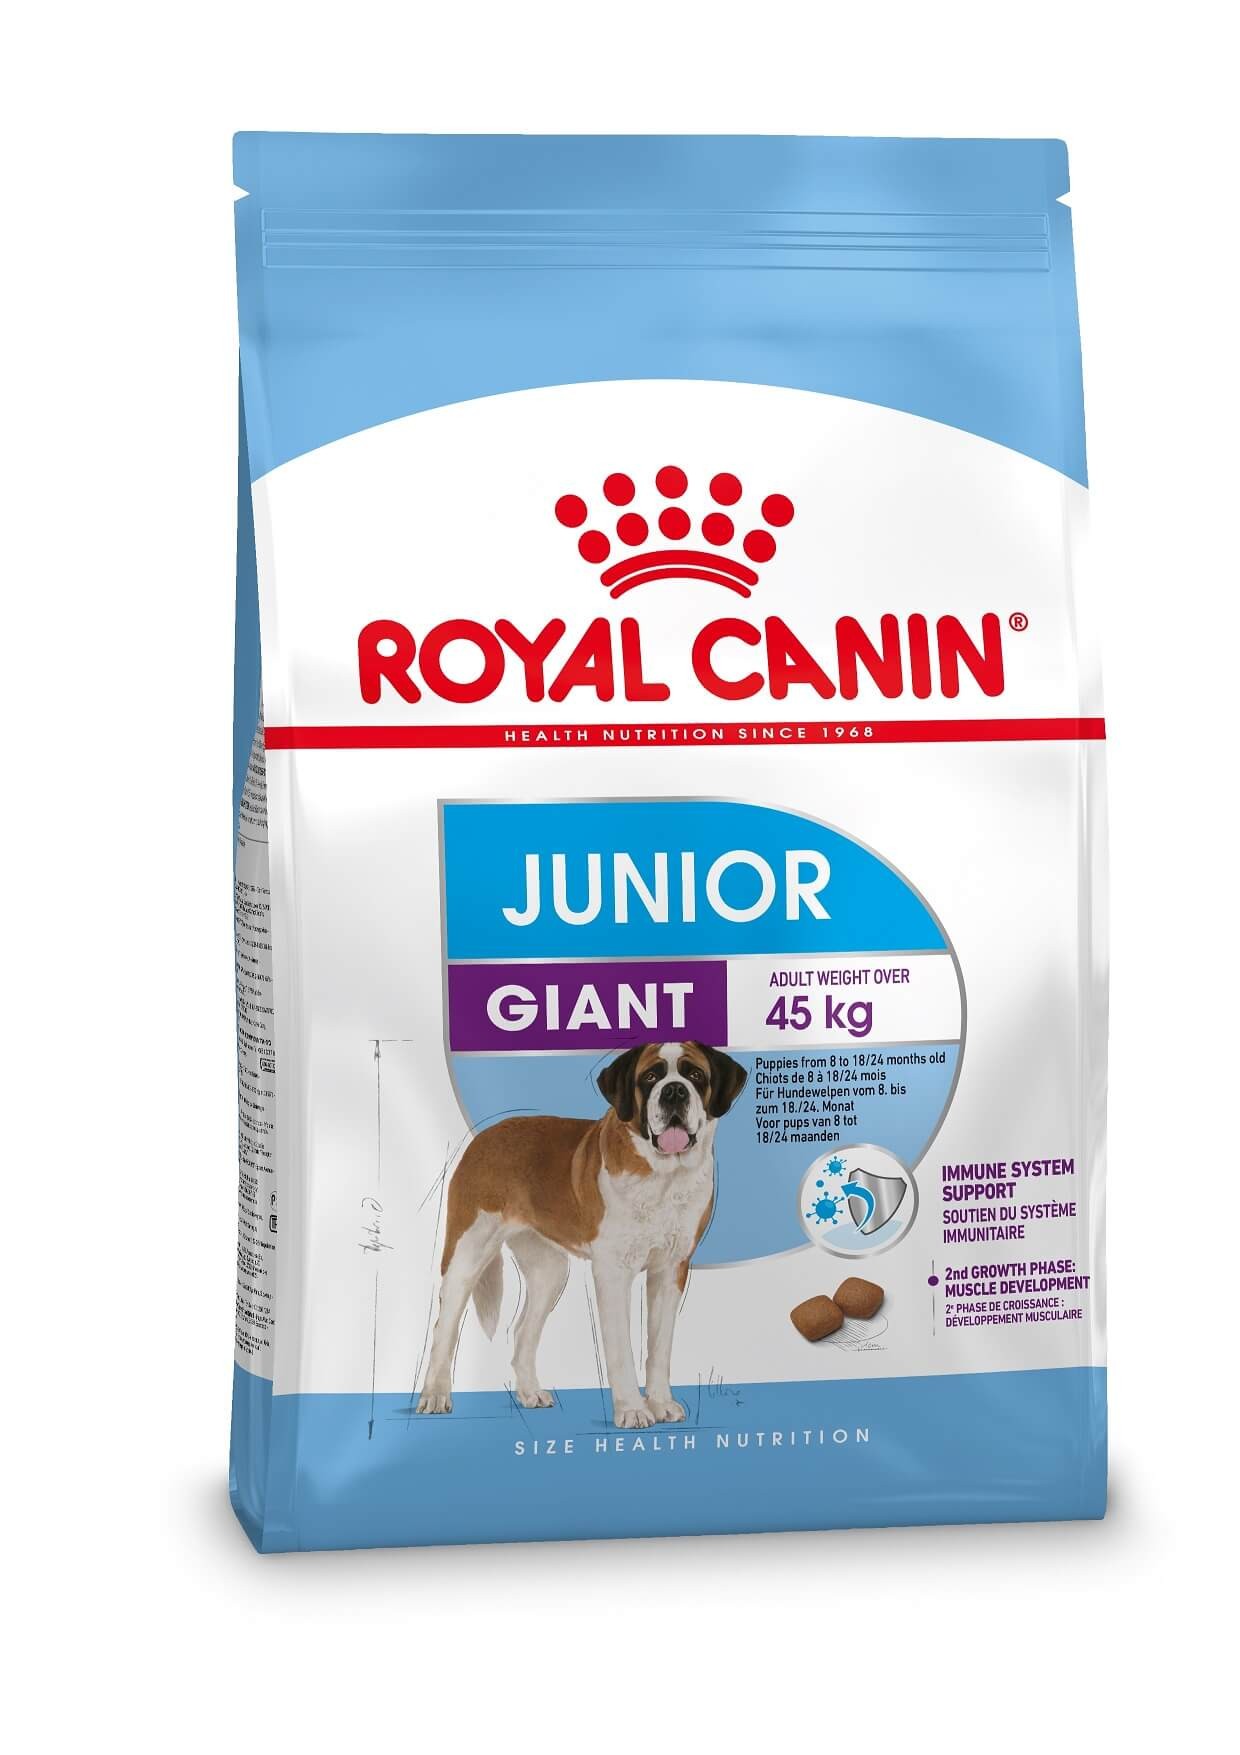 Royal Canin Giant Junior per cane